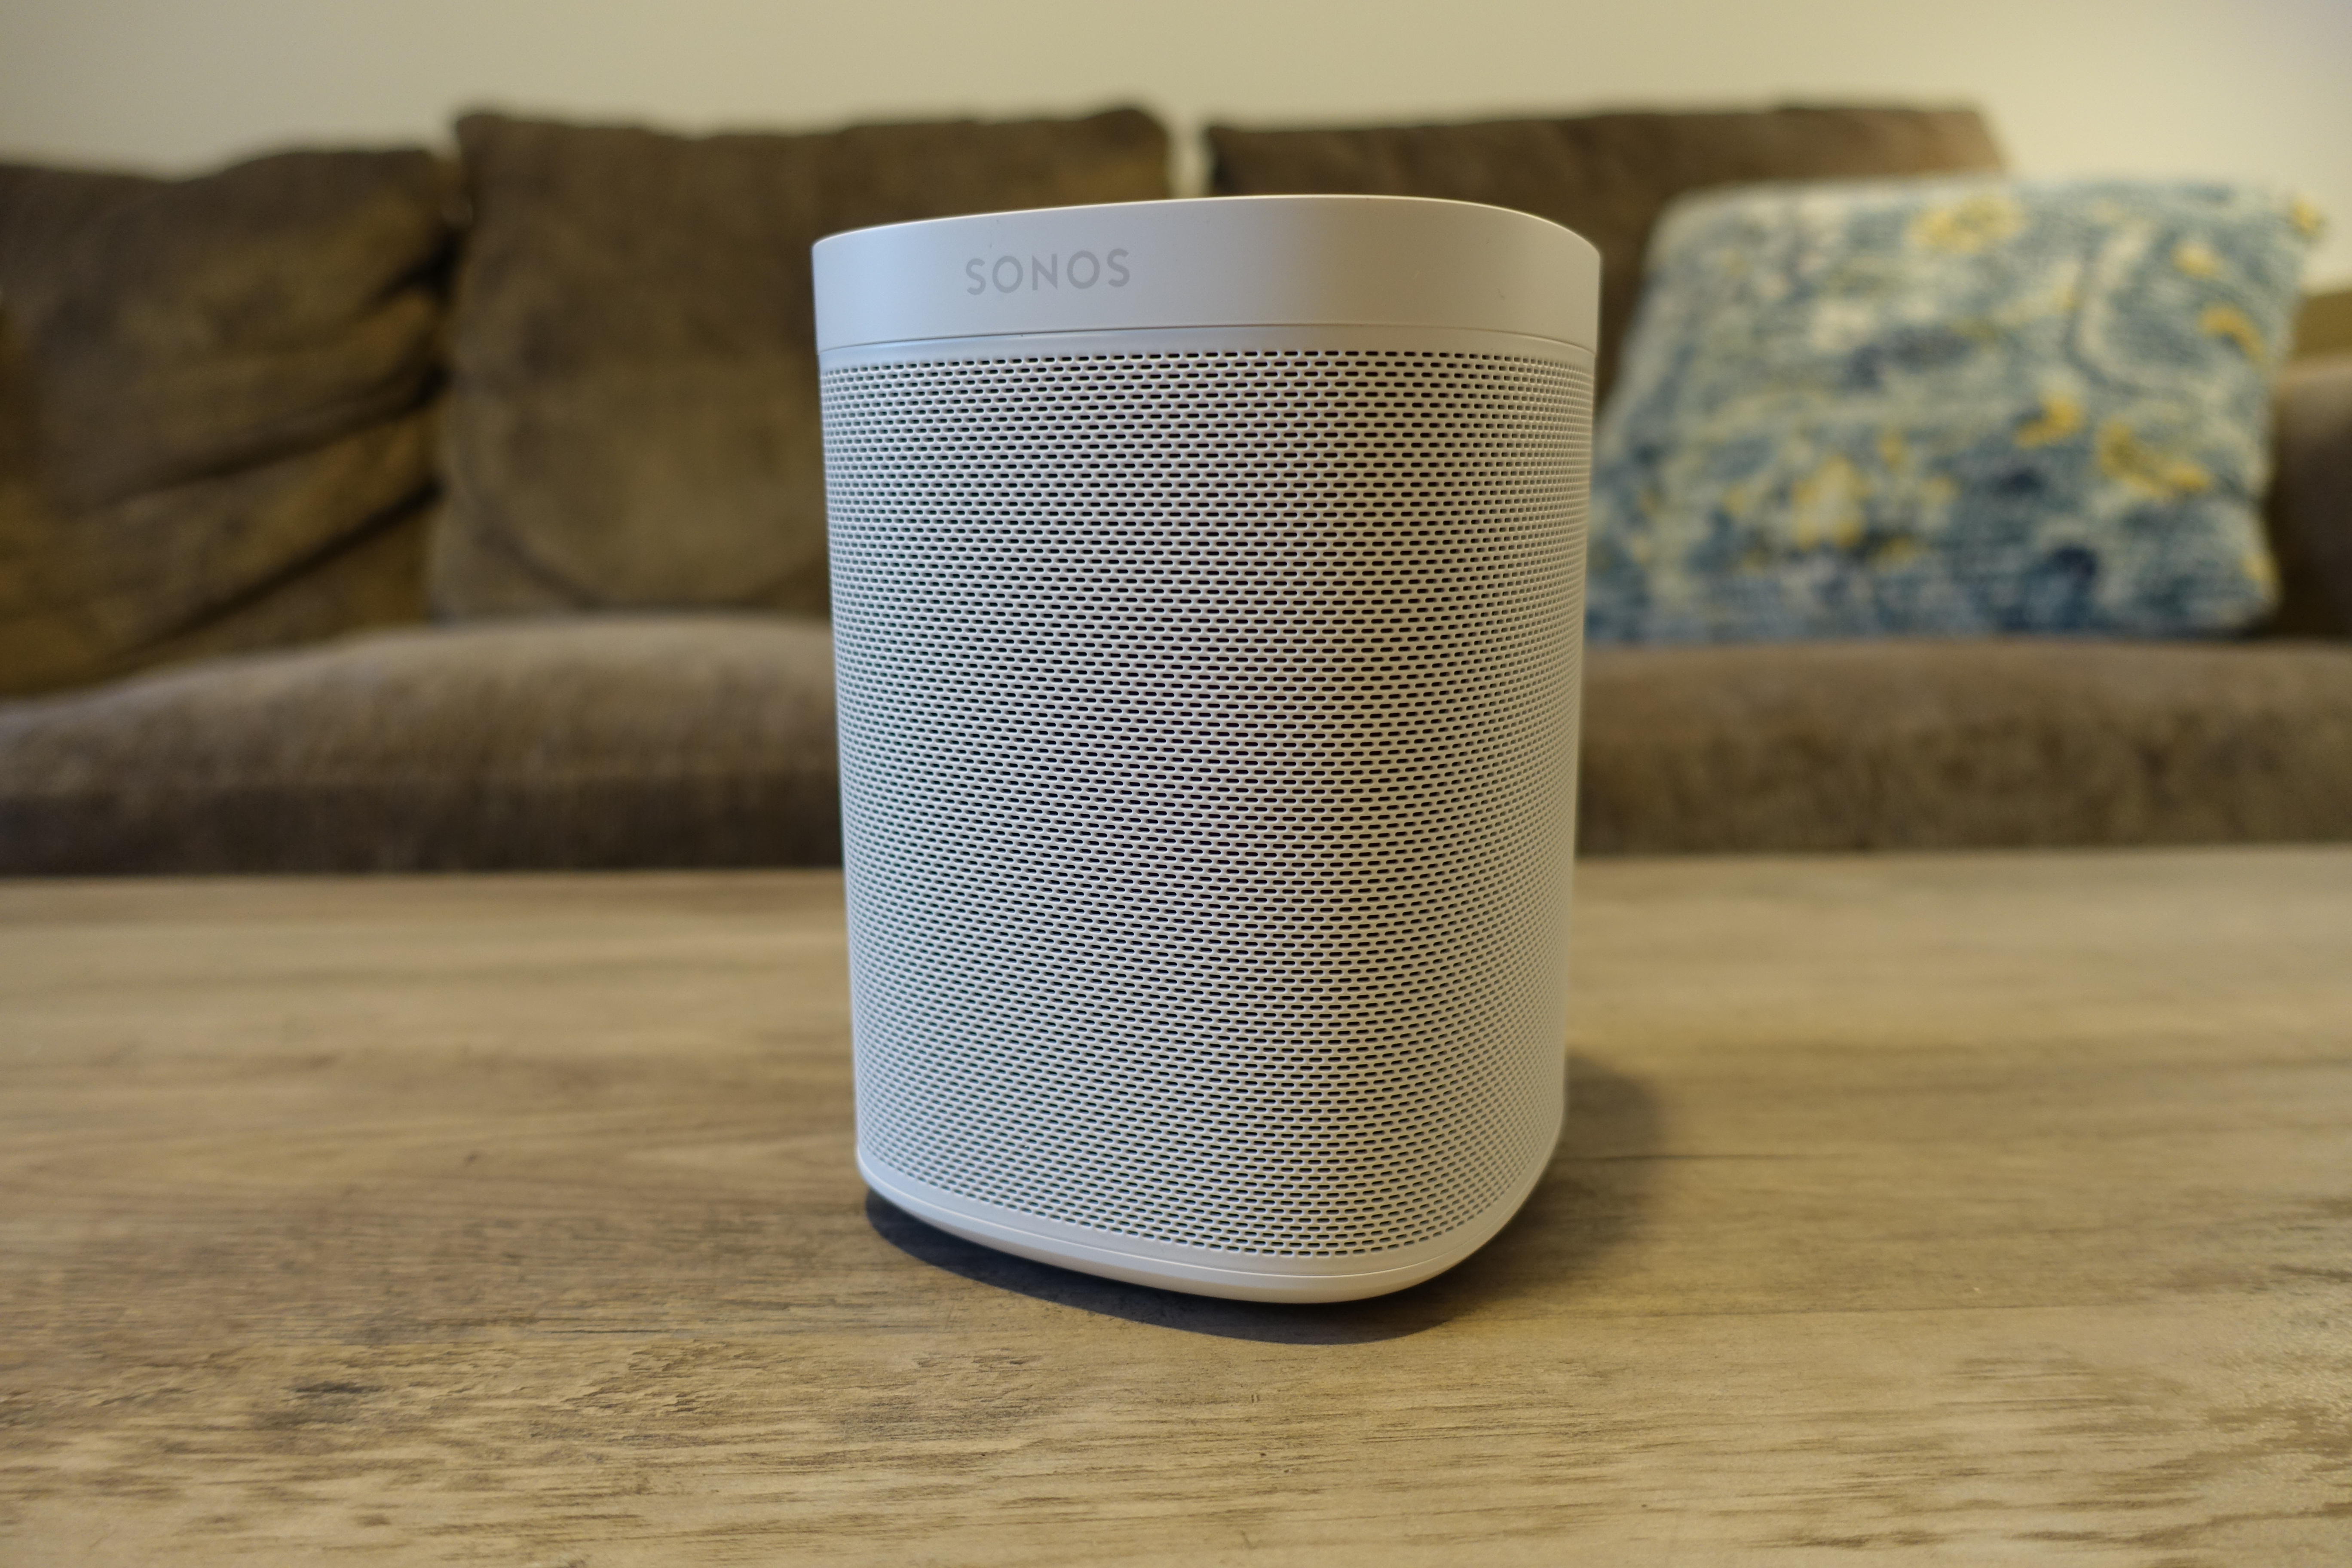 IT fail caused Sonos to ship unwanted speakers charge for them | Ars Technica